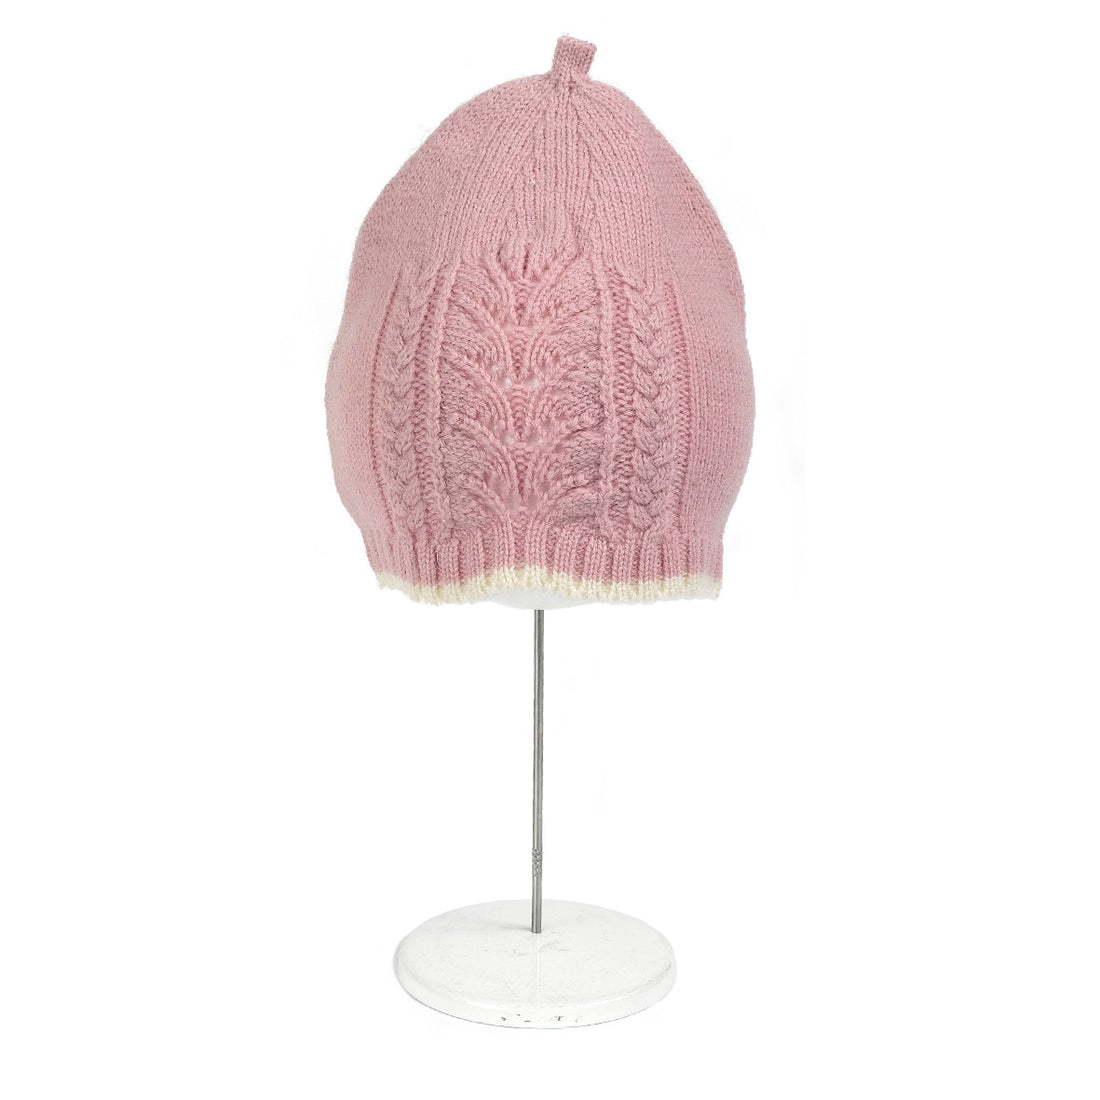 anne-claire-petit-lizzy-hat-knitted-lambwool-pink- (1)